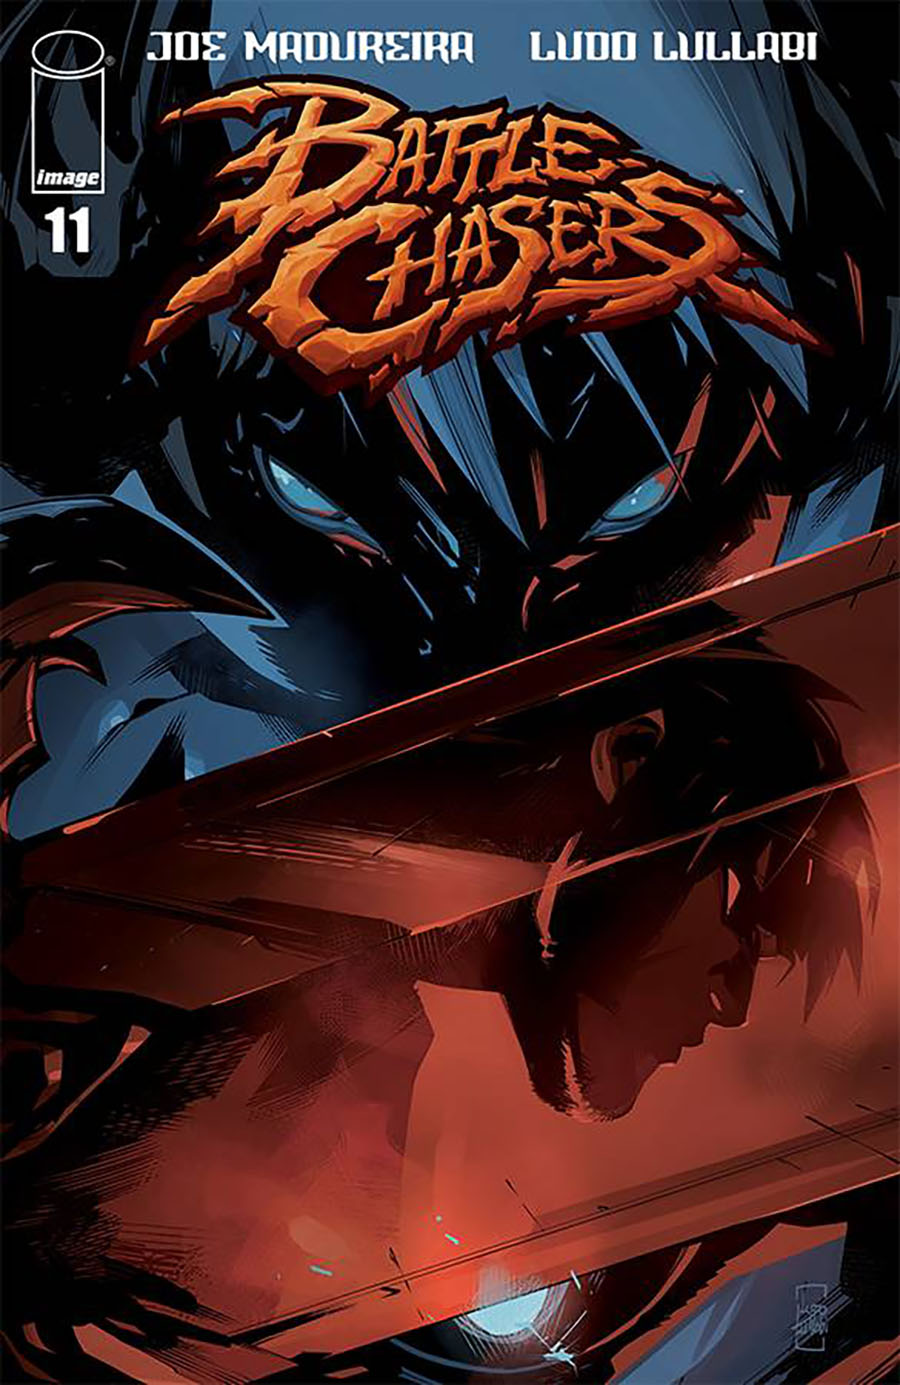 Battle Chasers #11 Cover A Regular Ludo Lullabi Cover